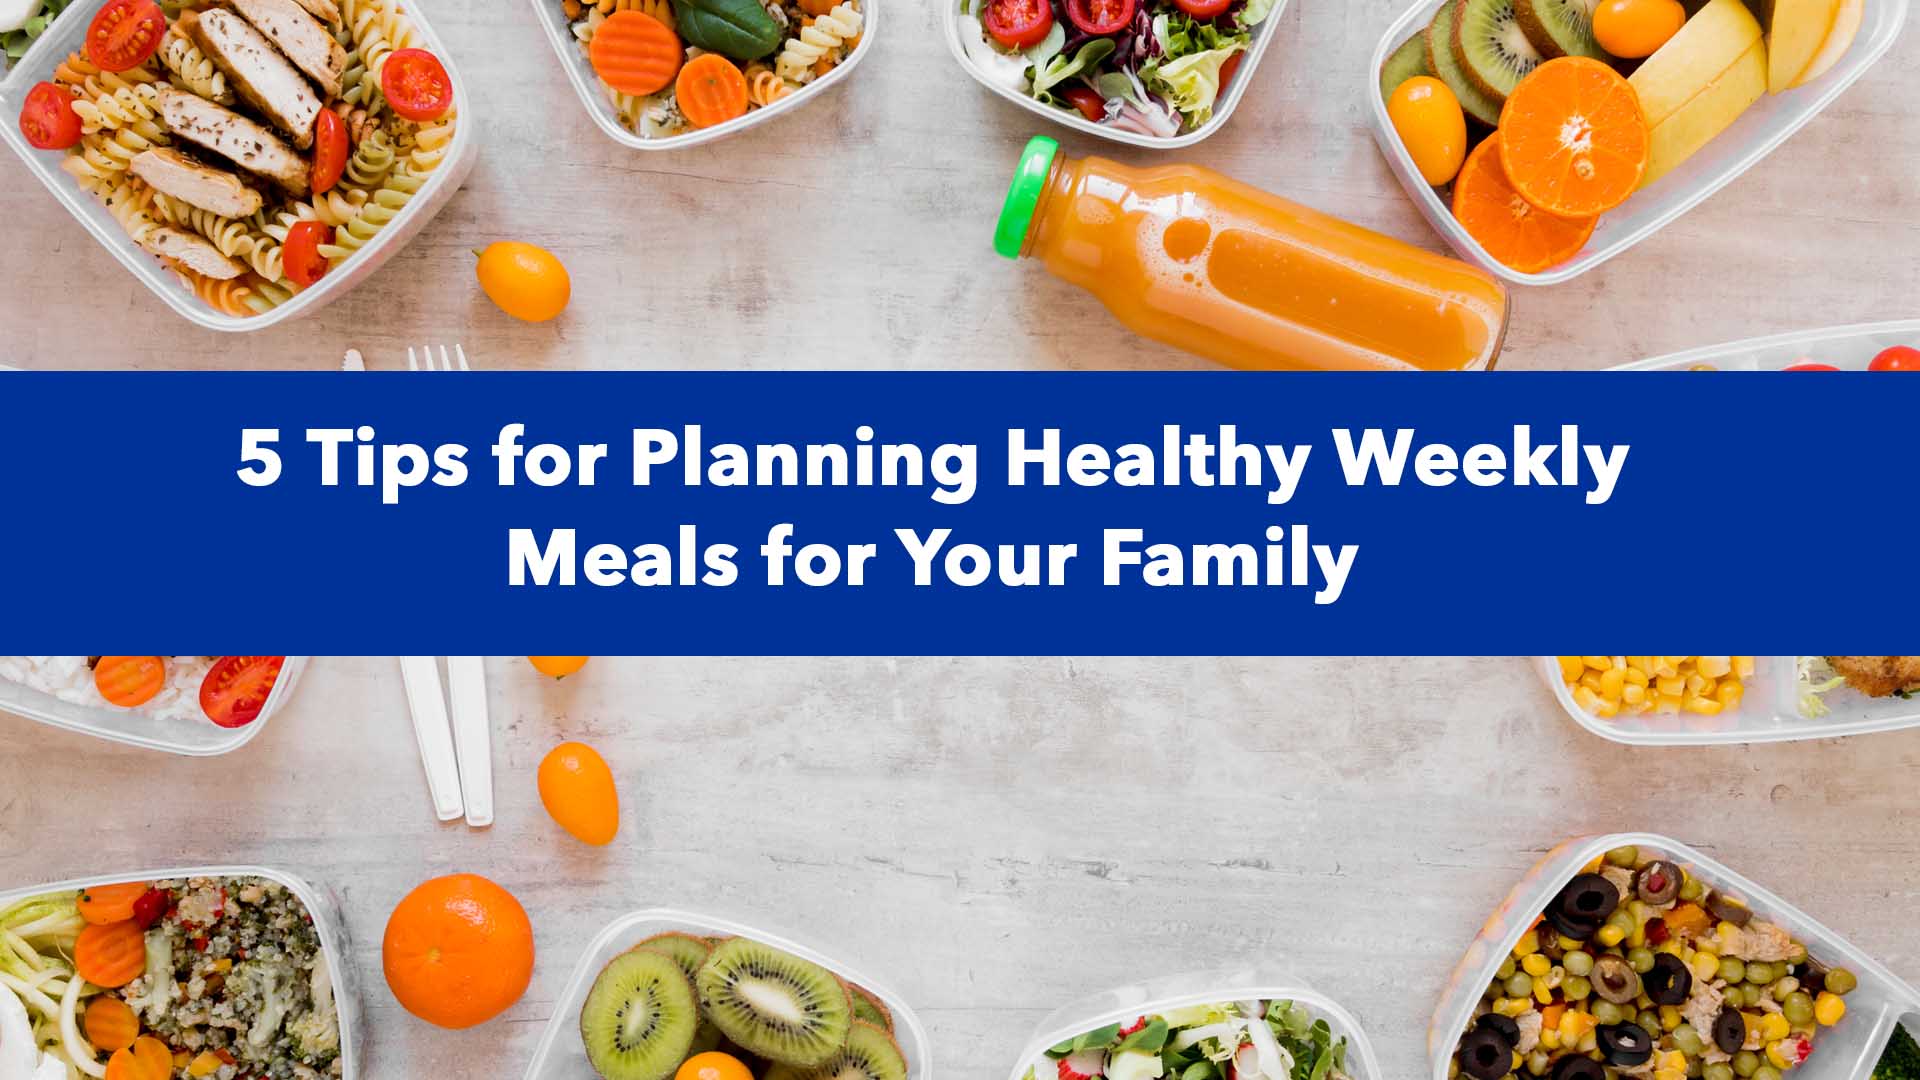 5 Tips for Planning Healthy Weekly Meals for Your Family